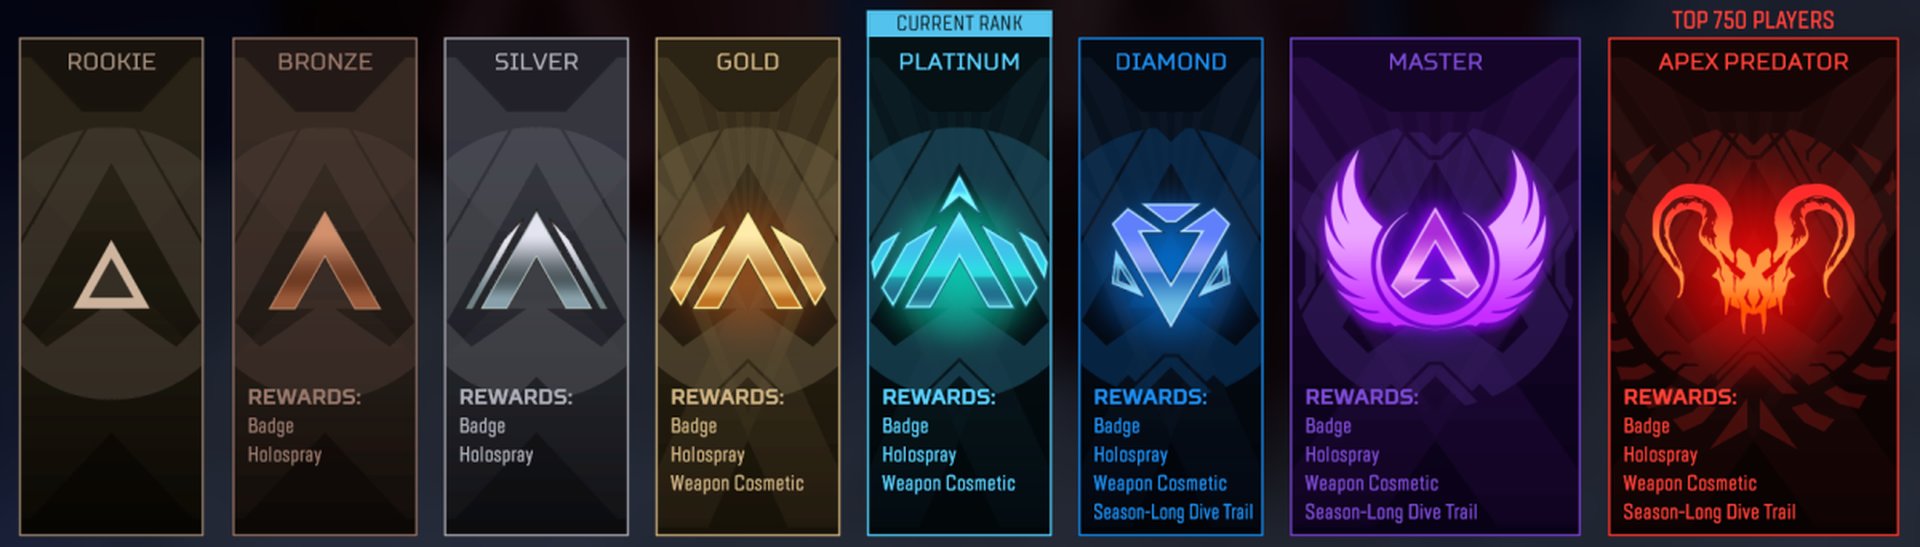 Visual representation of Apex Legends ranking tiers from Bronze to Apex Predator, highlighting the progression and competitive ranking system in the game.